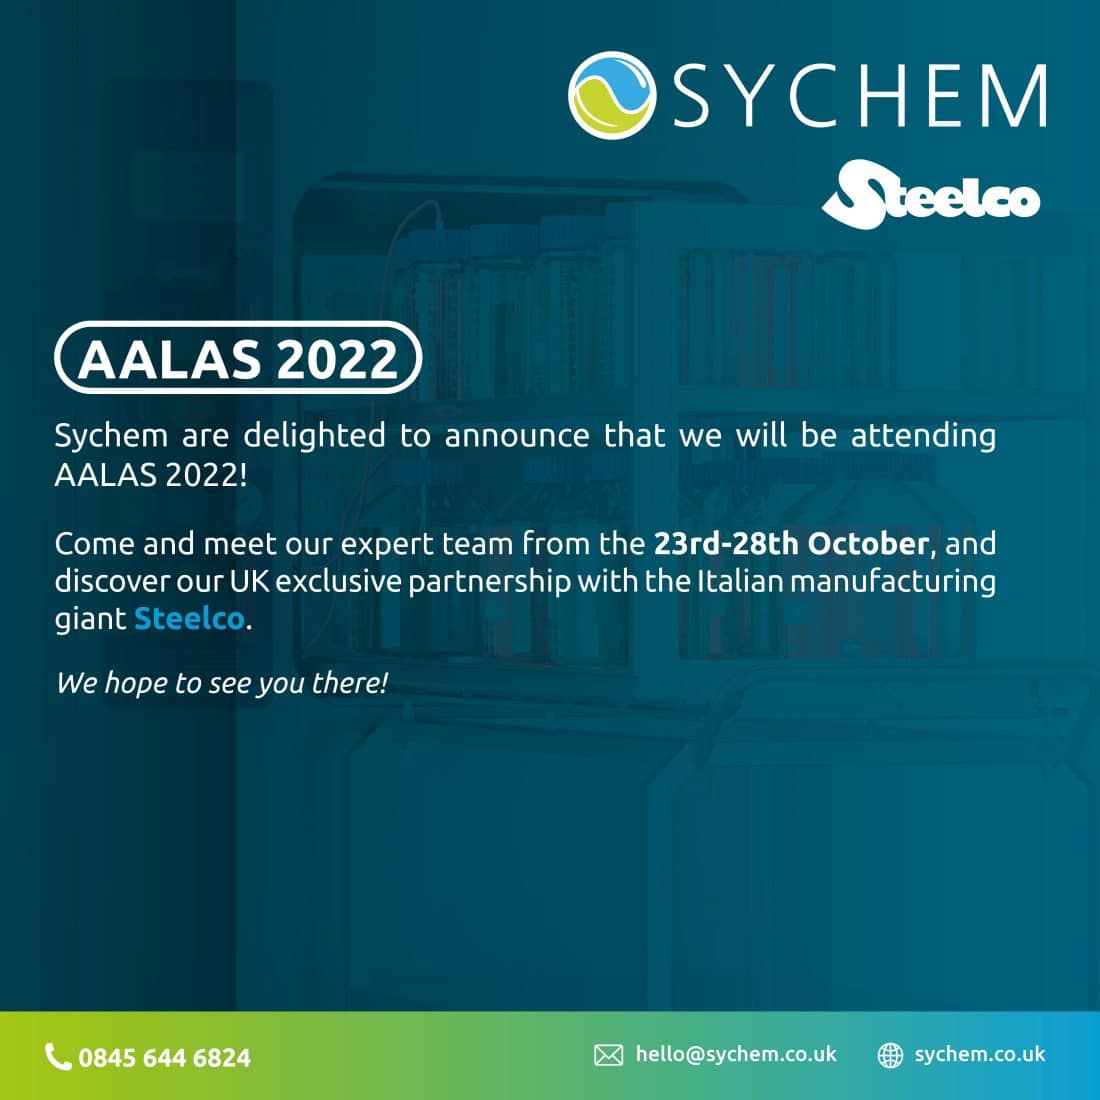 We are going to AALAS 2022! Sychem Steelco